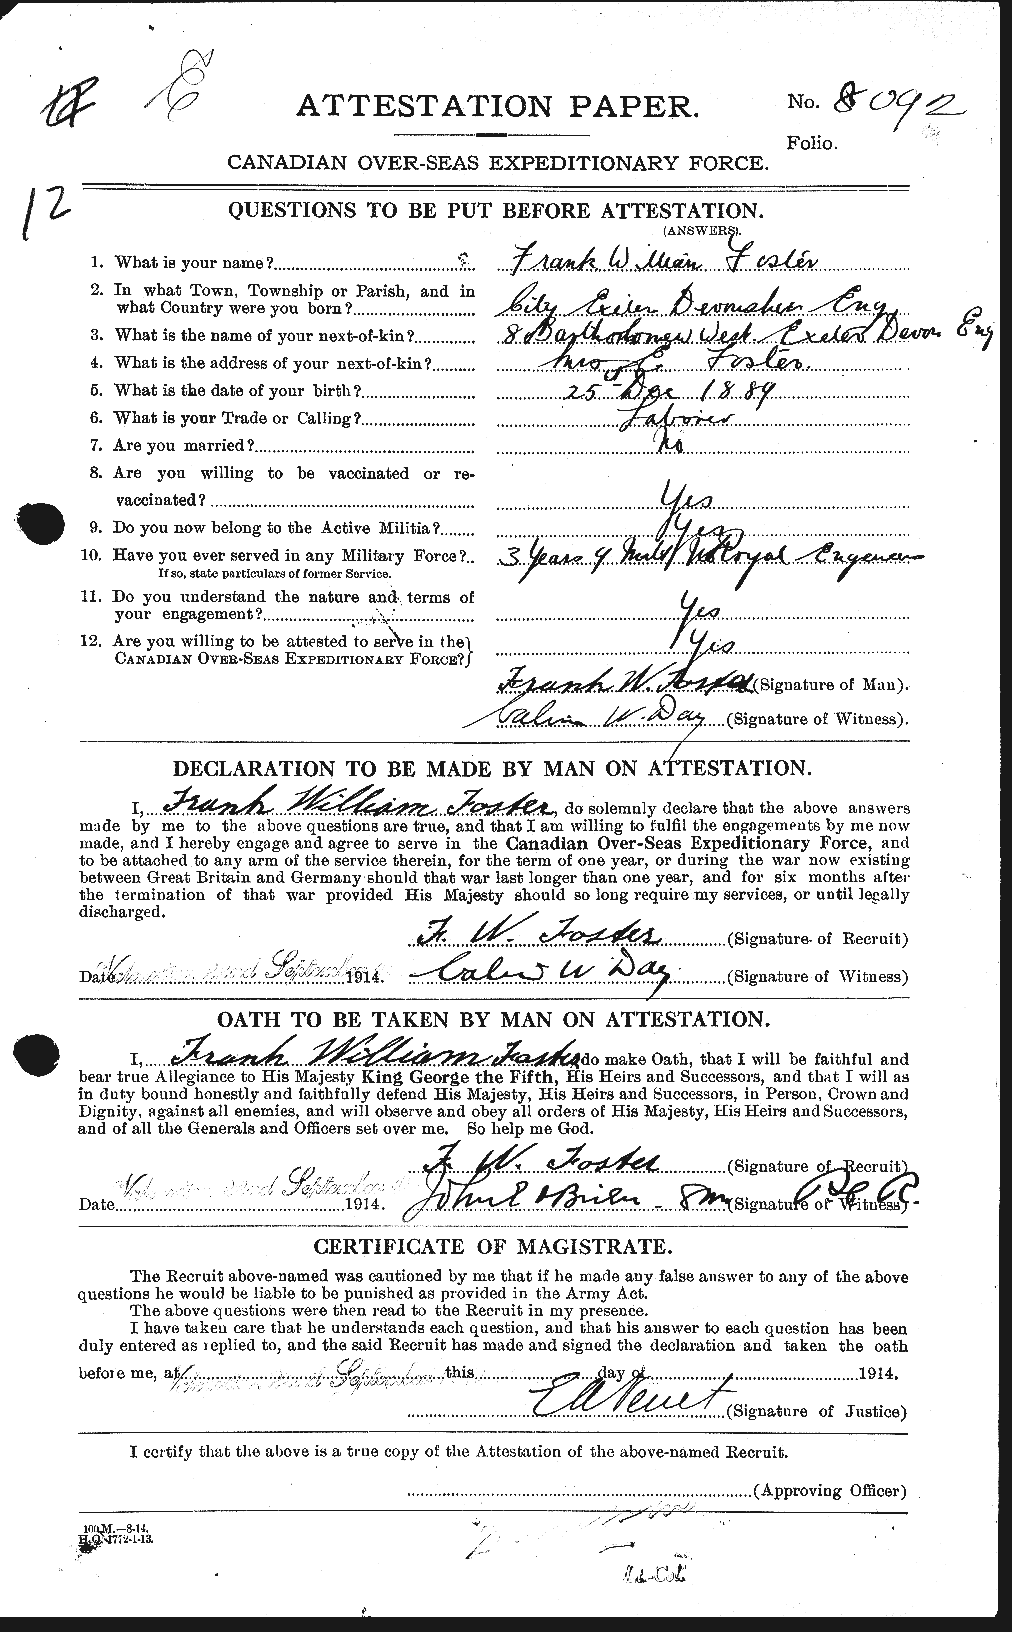 Personnel Records of the First World War - CEF 330630a